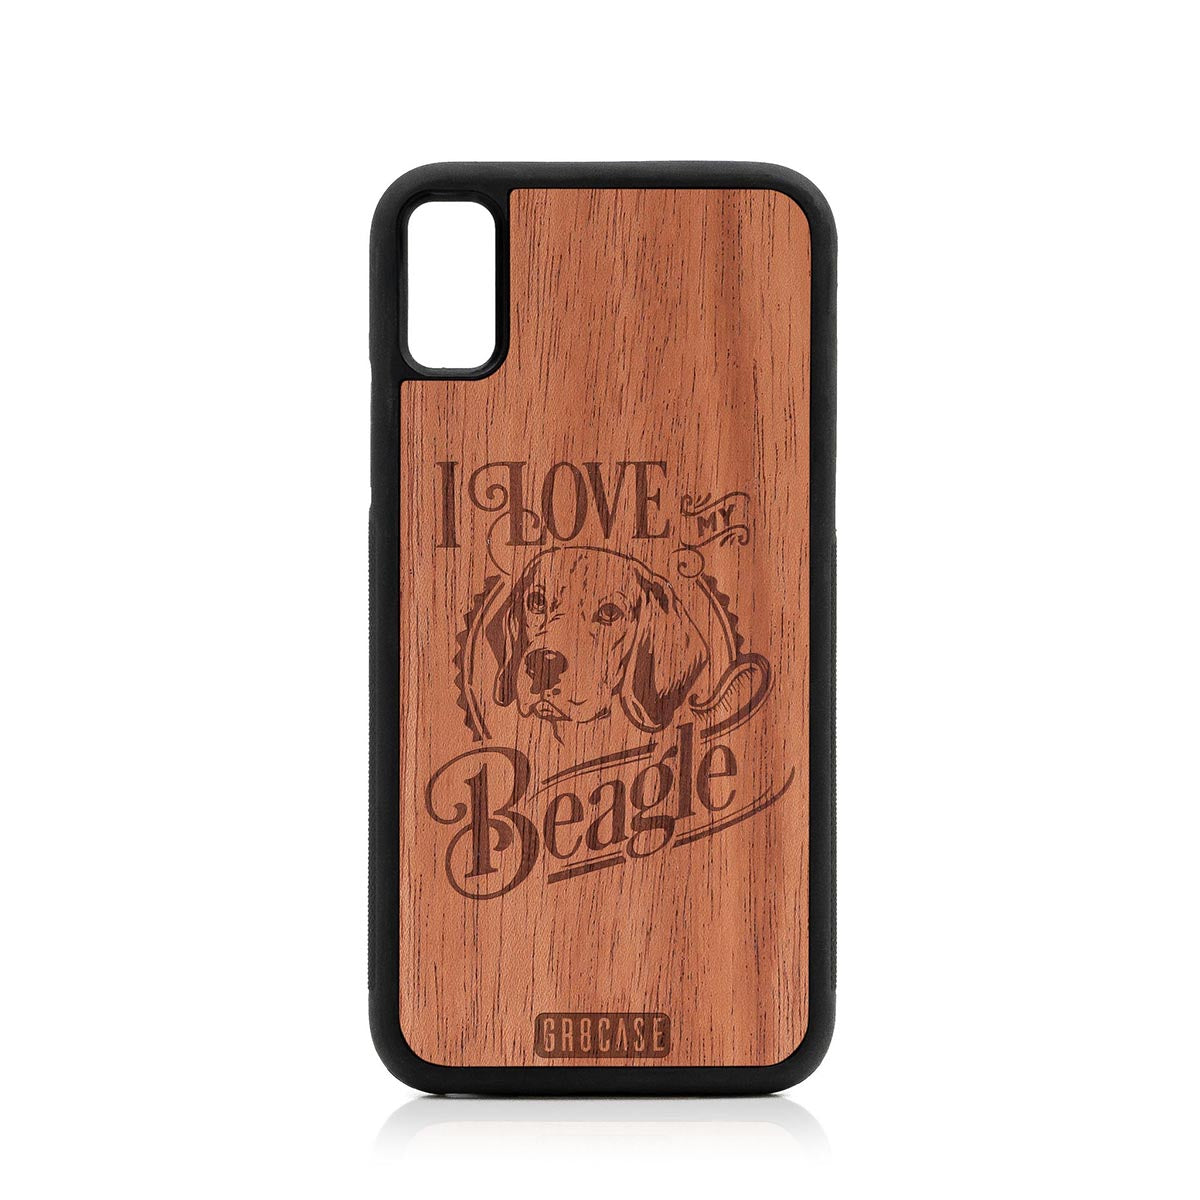 I Love My Beagle Design Wood Case For iPhone XS Max by GR8CASE